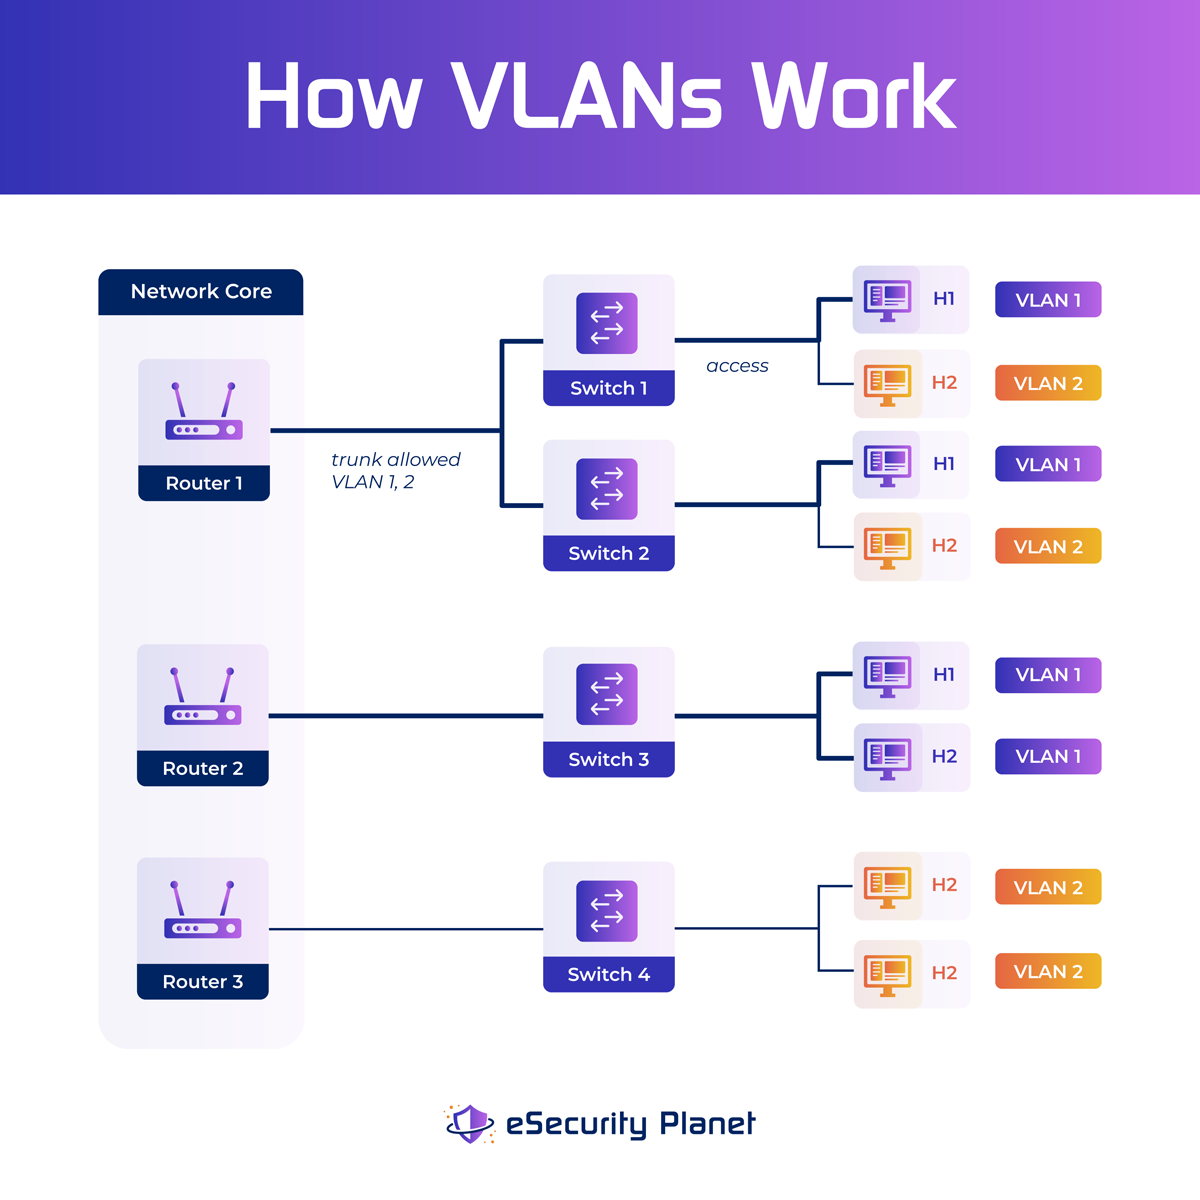 How VLANs work infographic by eSecurity Planet.